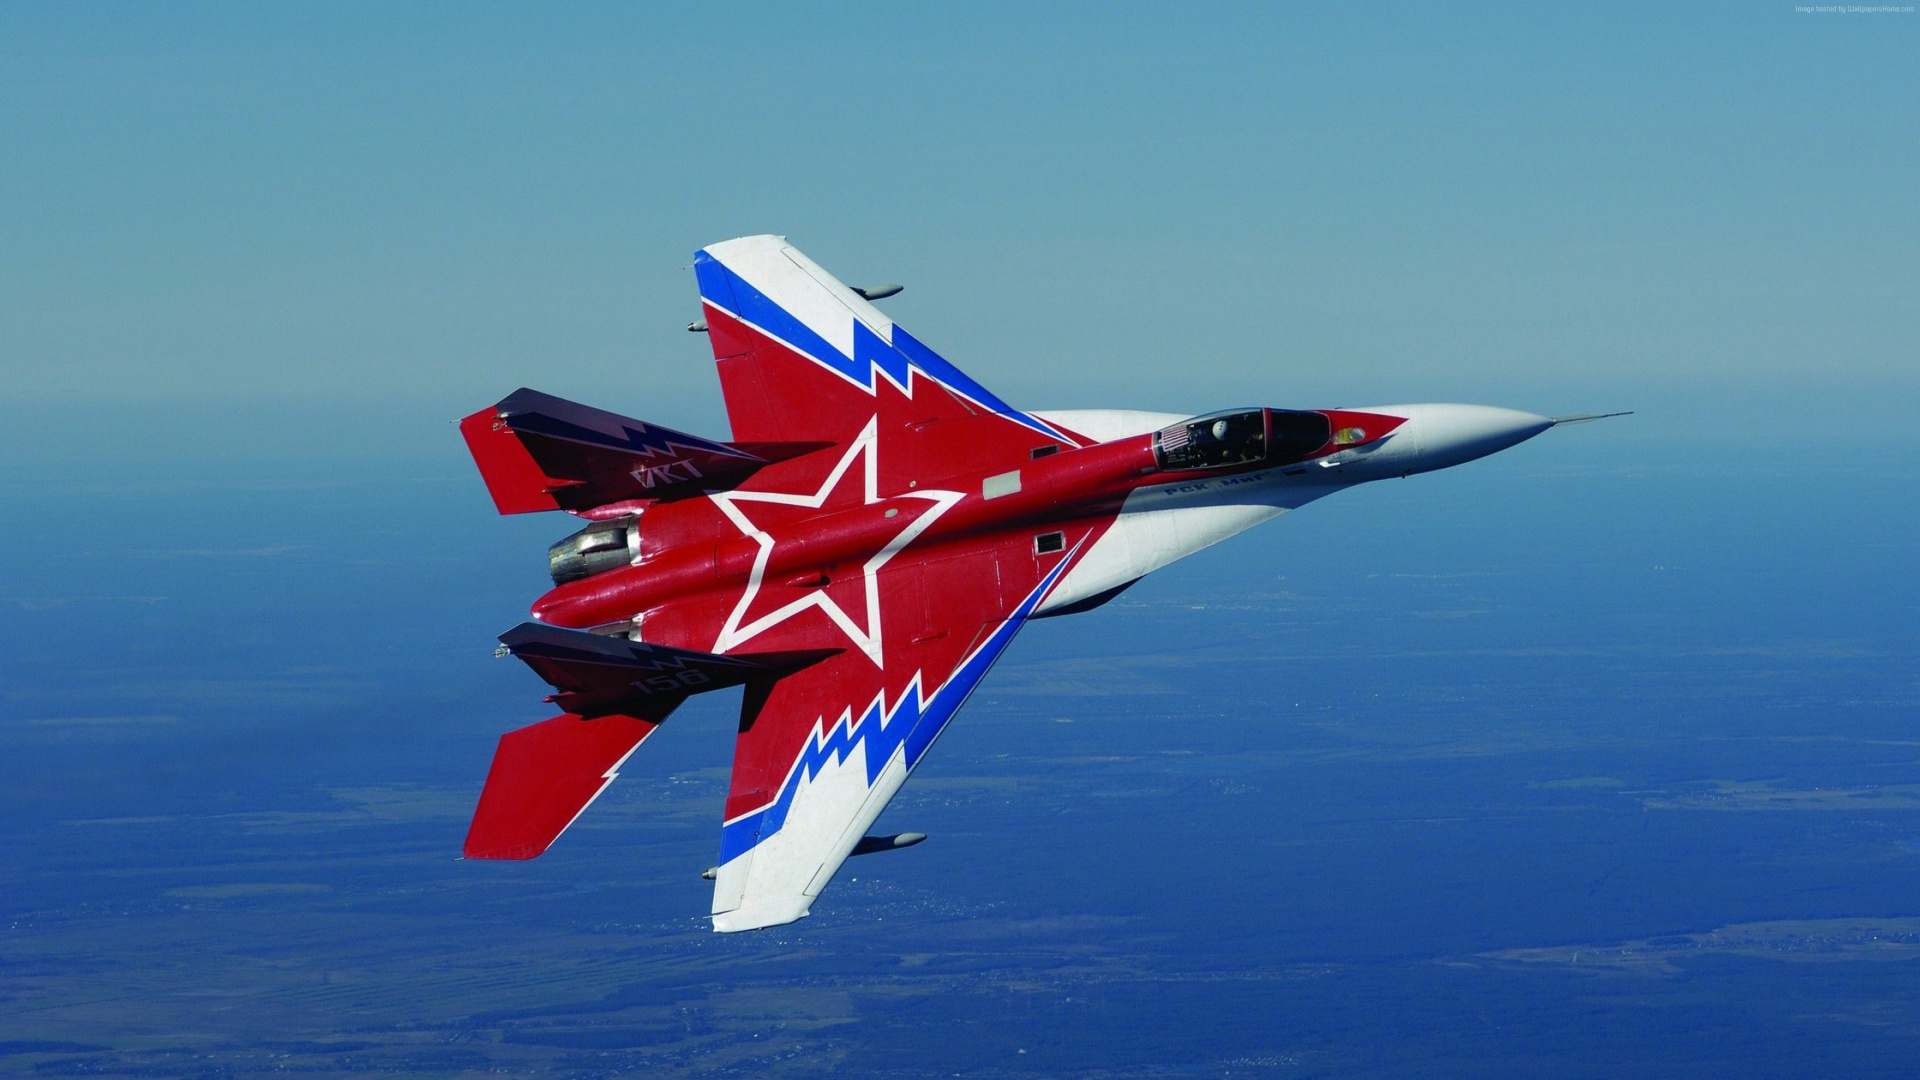 Red and White Jet Plane Flying Over Blue Sky During Daytime. Wallpaper in 1920x1080 Resolution